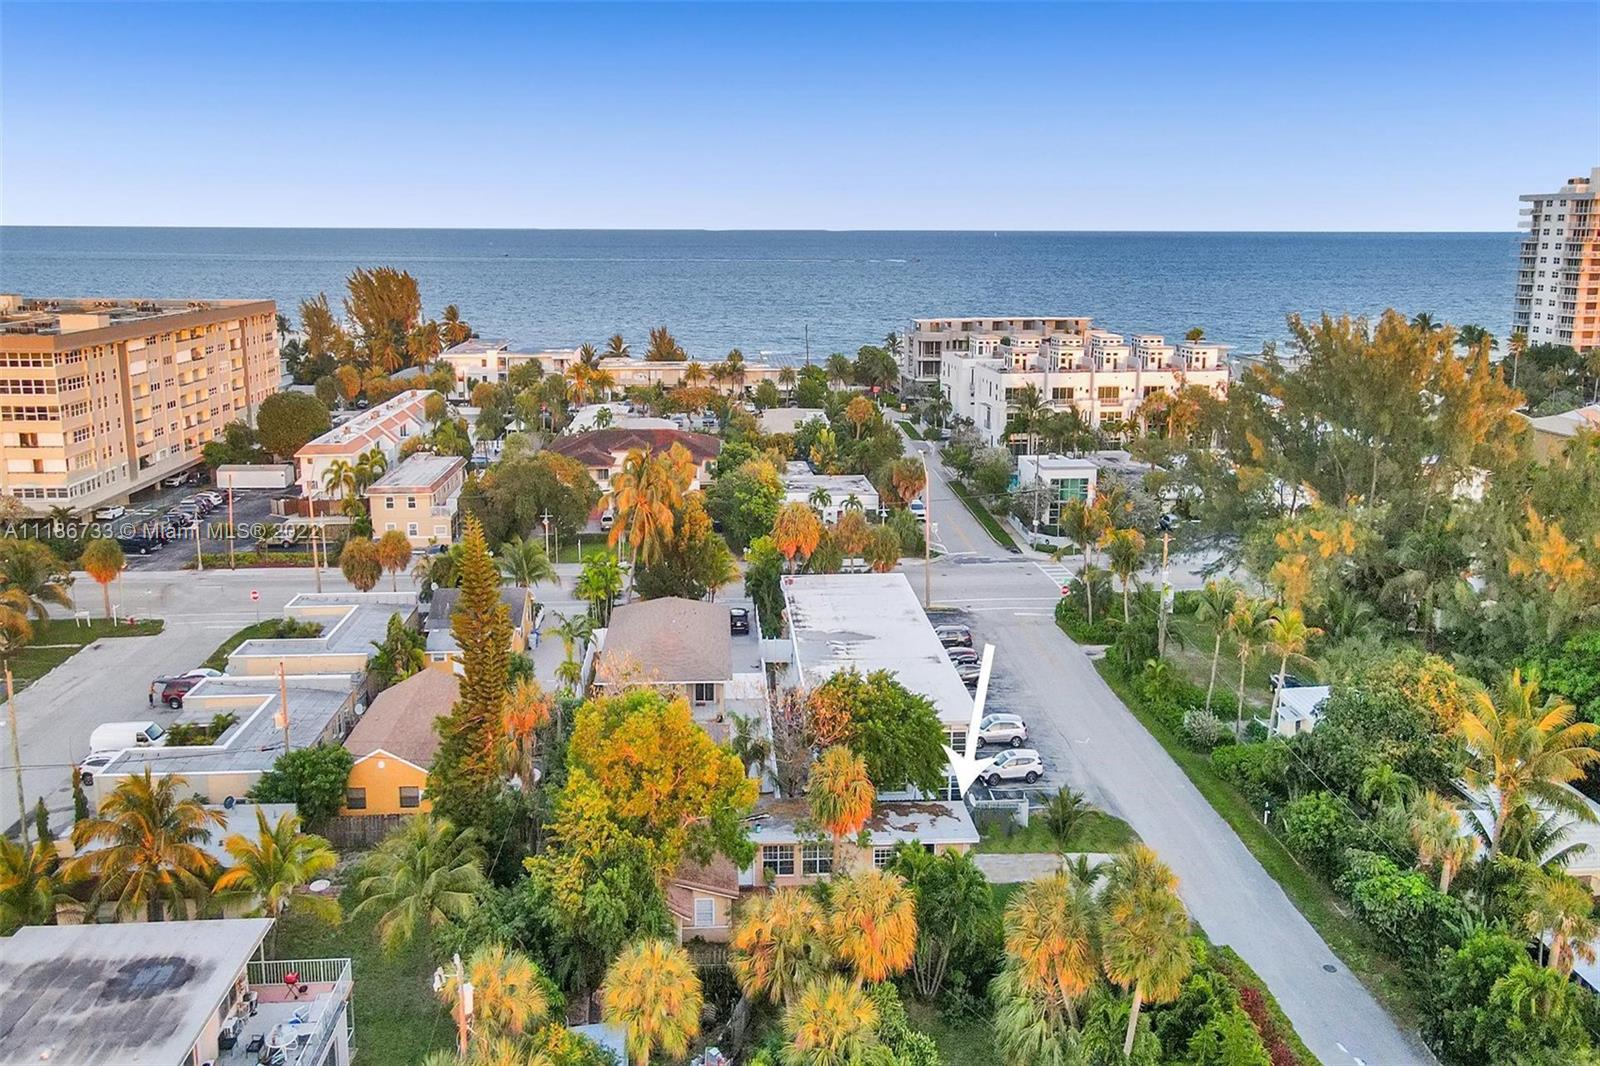 3/1 FOOTSTEPS TO THE BEACH , PIER & DOWNTOWN RESTAURANTS. NO HOA , CAN PARK BOAT. EARN EXTRA INCOME WITH 1/1 EFFICIENCY ATTACHED , OR OPEN UP & MAKE A BIGGER HOME. TON OF POSSIBILITIES TO GET CREATIVE. RARELY EVER AVAILABLE LOCATION. TENANT OCCUPIED , PLEASE DO NOT DISTURB TENANTS.